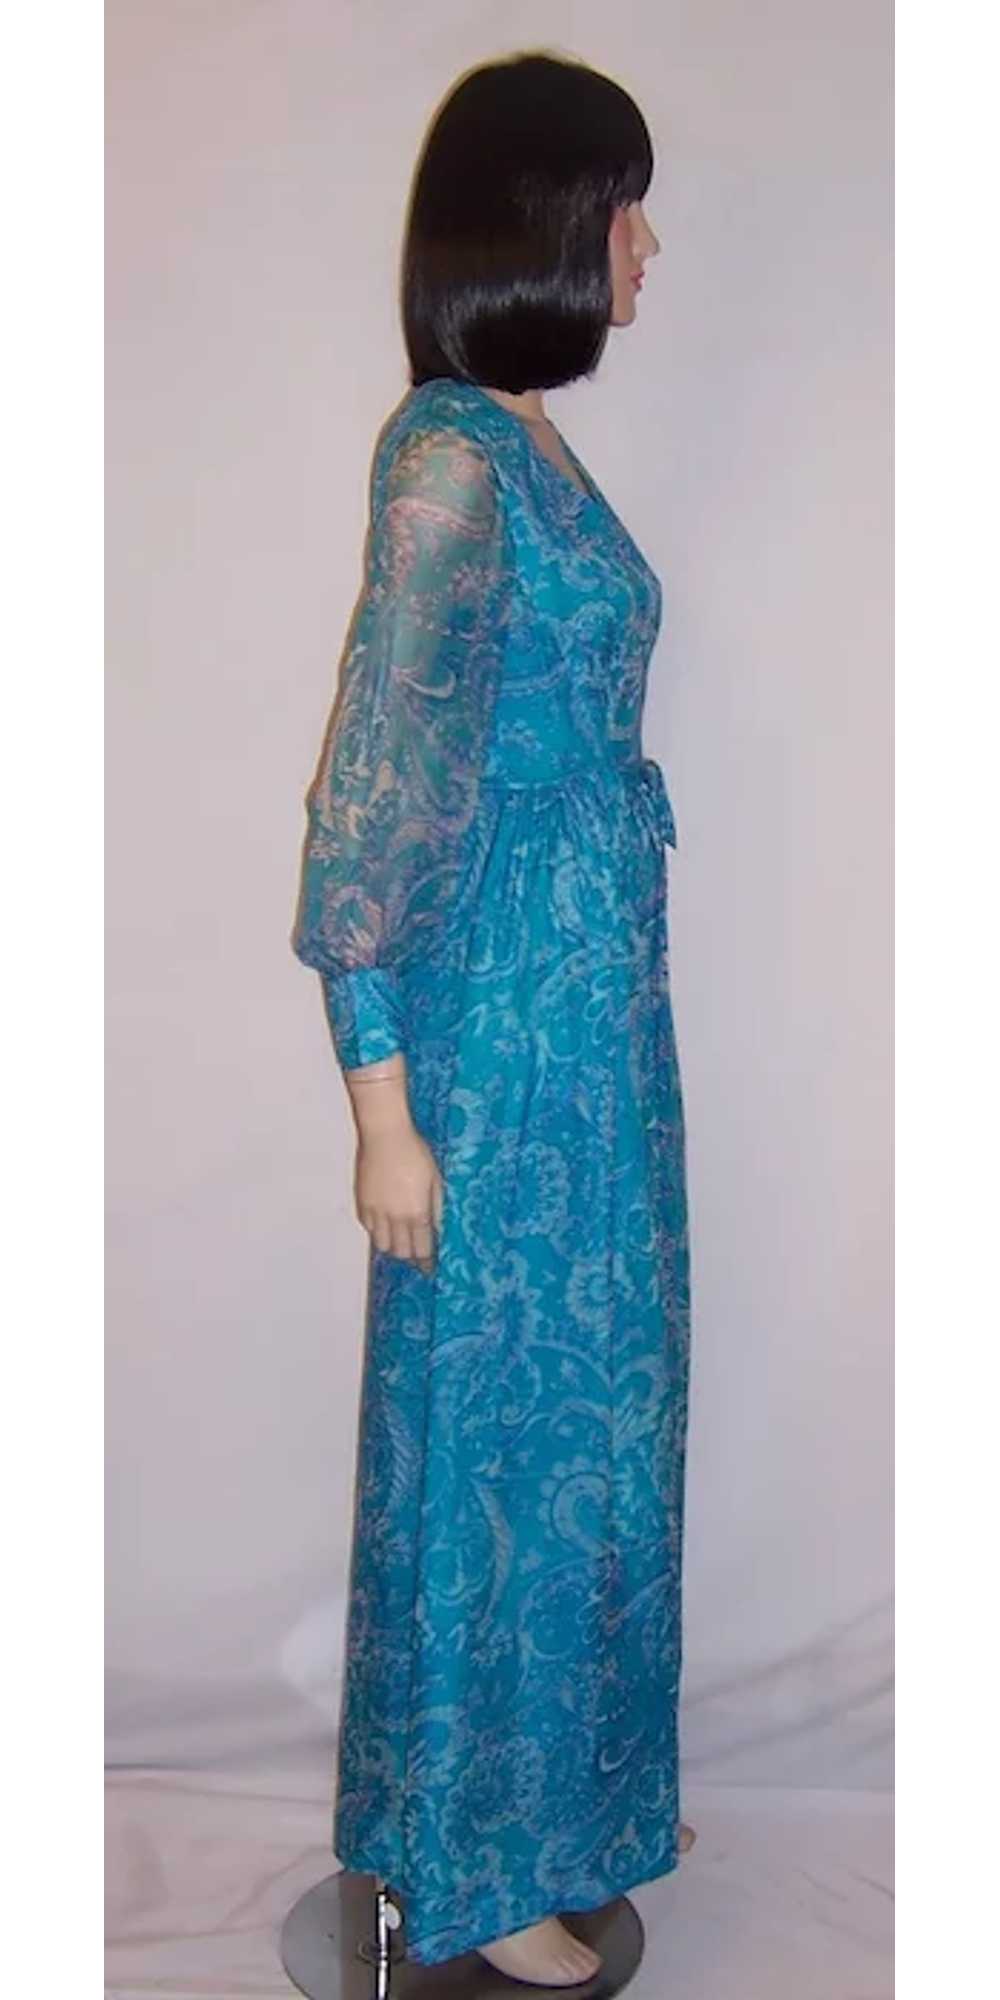 1960's Turquoise Printed Paisley Chiffon Gown - image 2